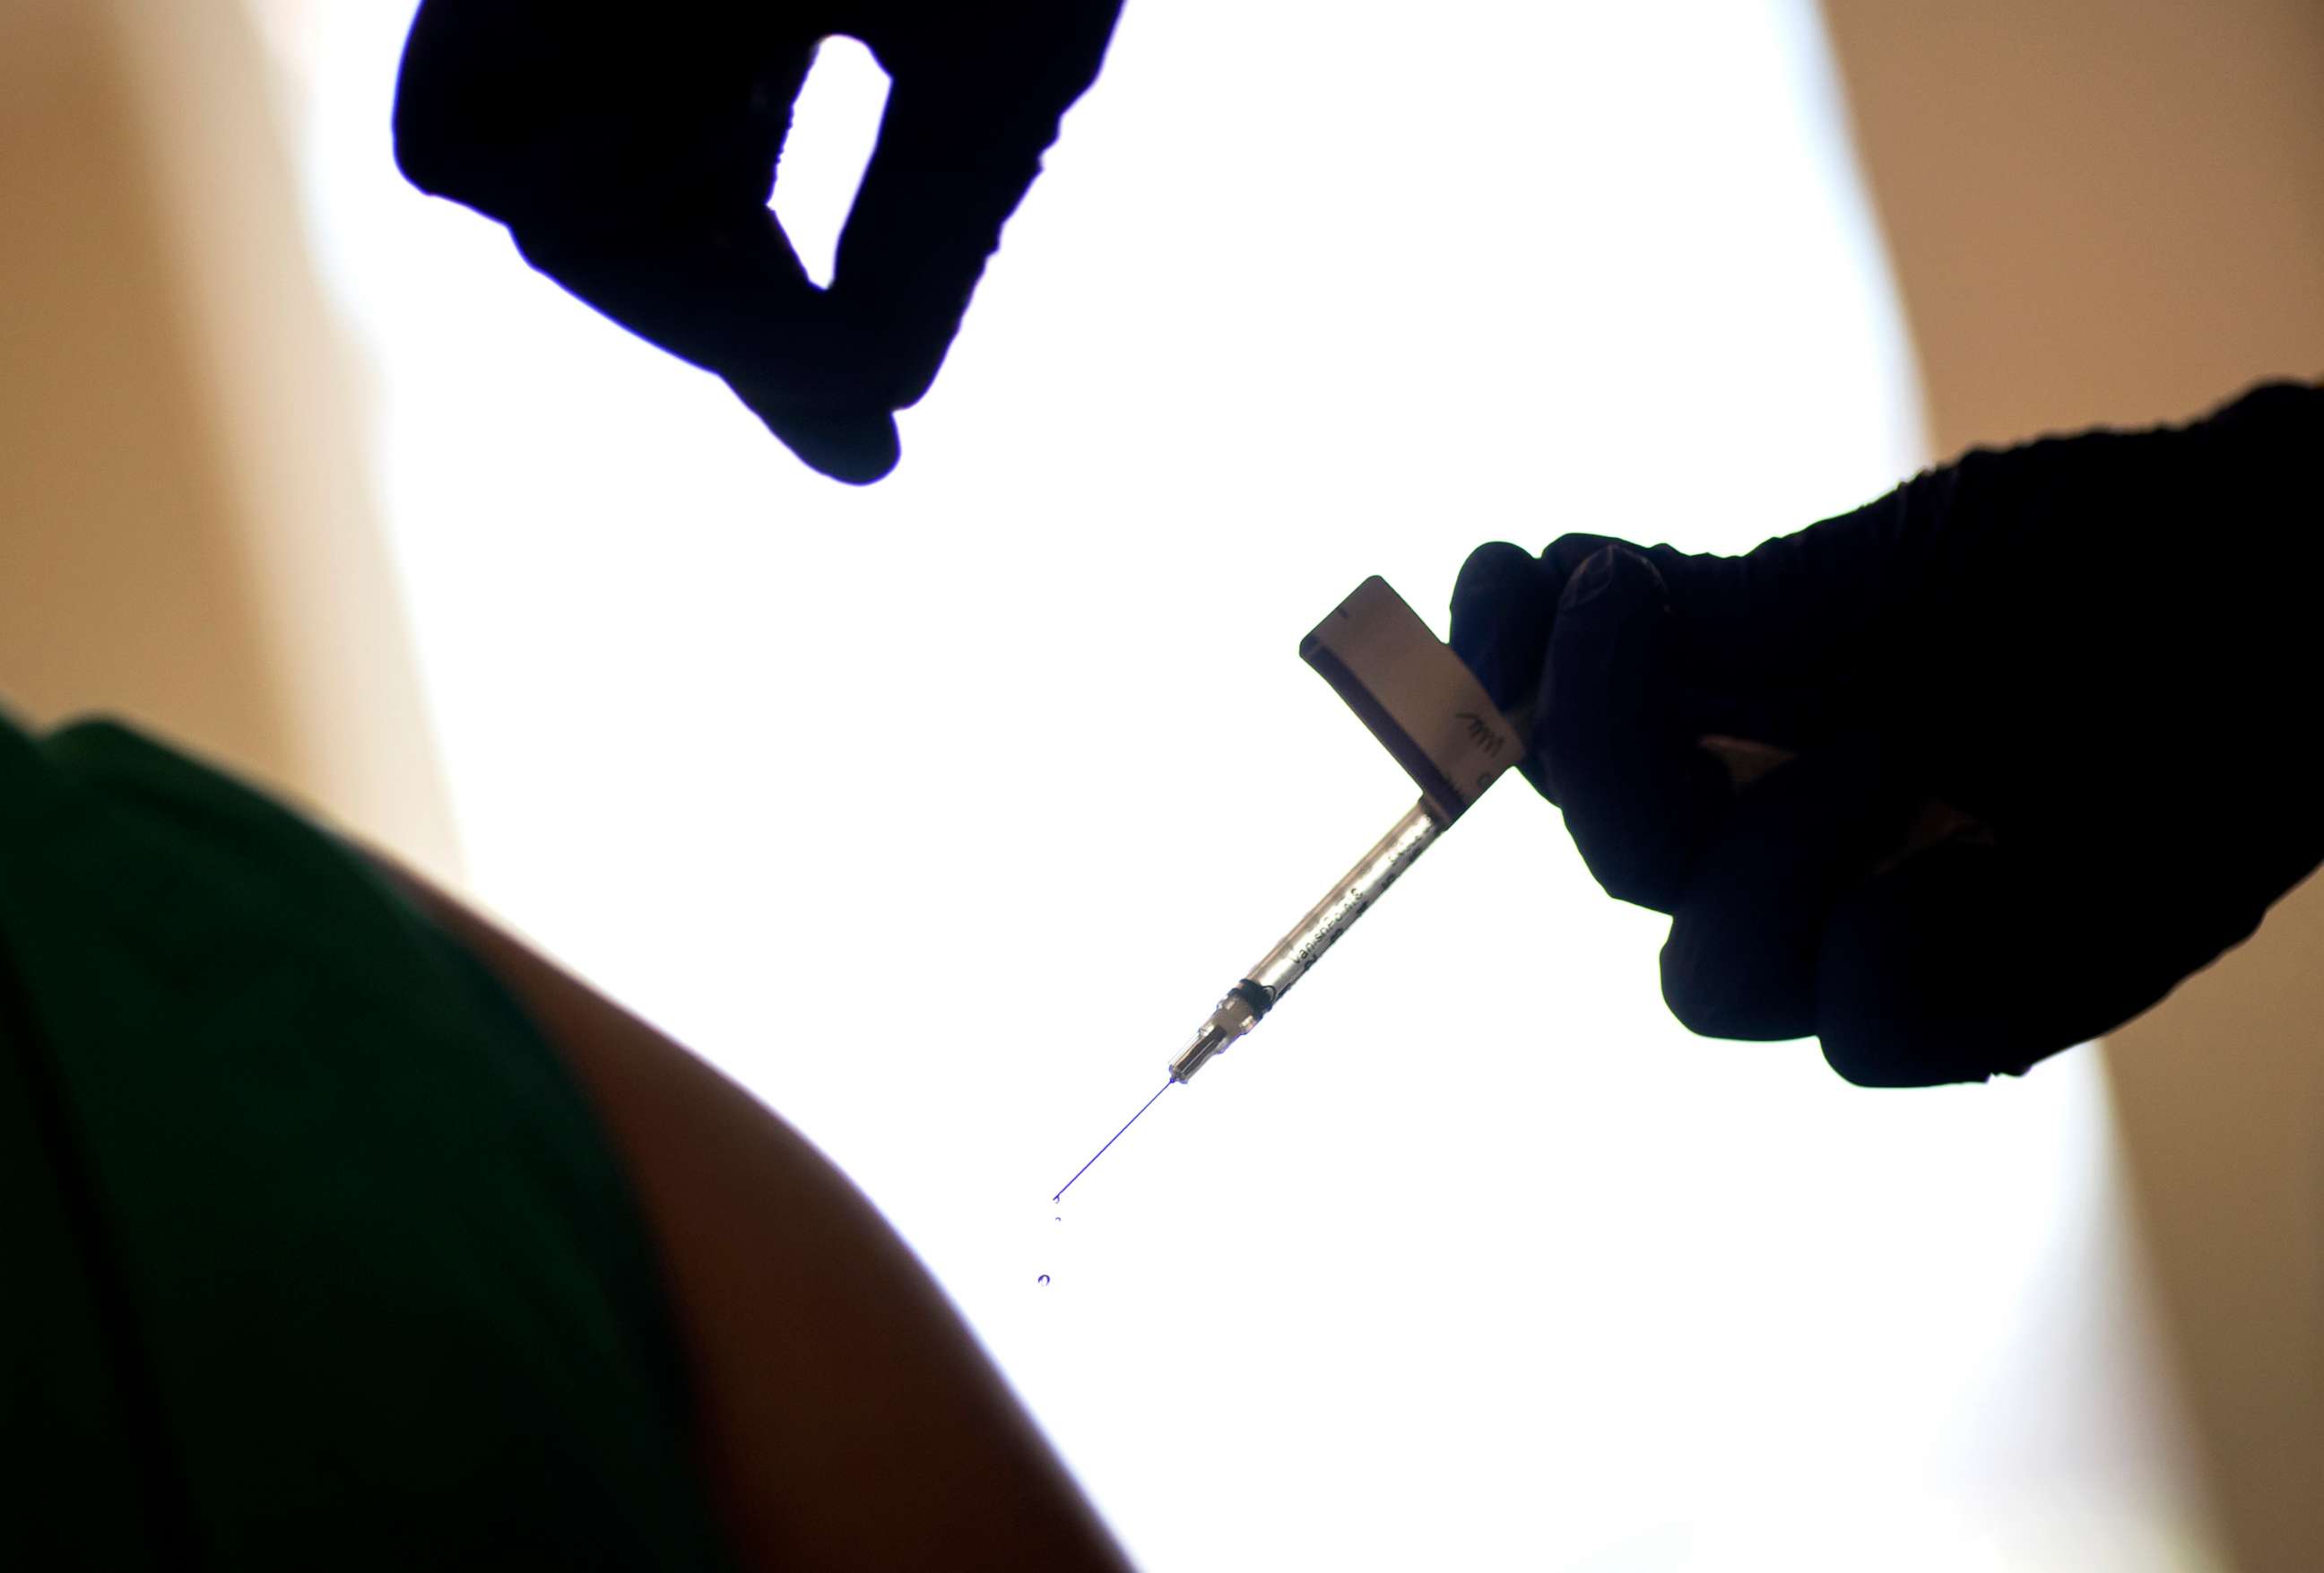 PHOTO: A droplet falls from a syringe after a health care worker was injected with the Pfizer-BioNTech COVID-19 vaccine in Providence, R.I., Dec. 15, 2020.